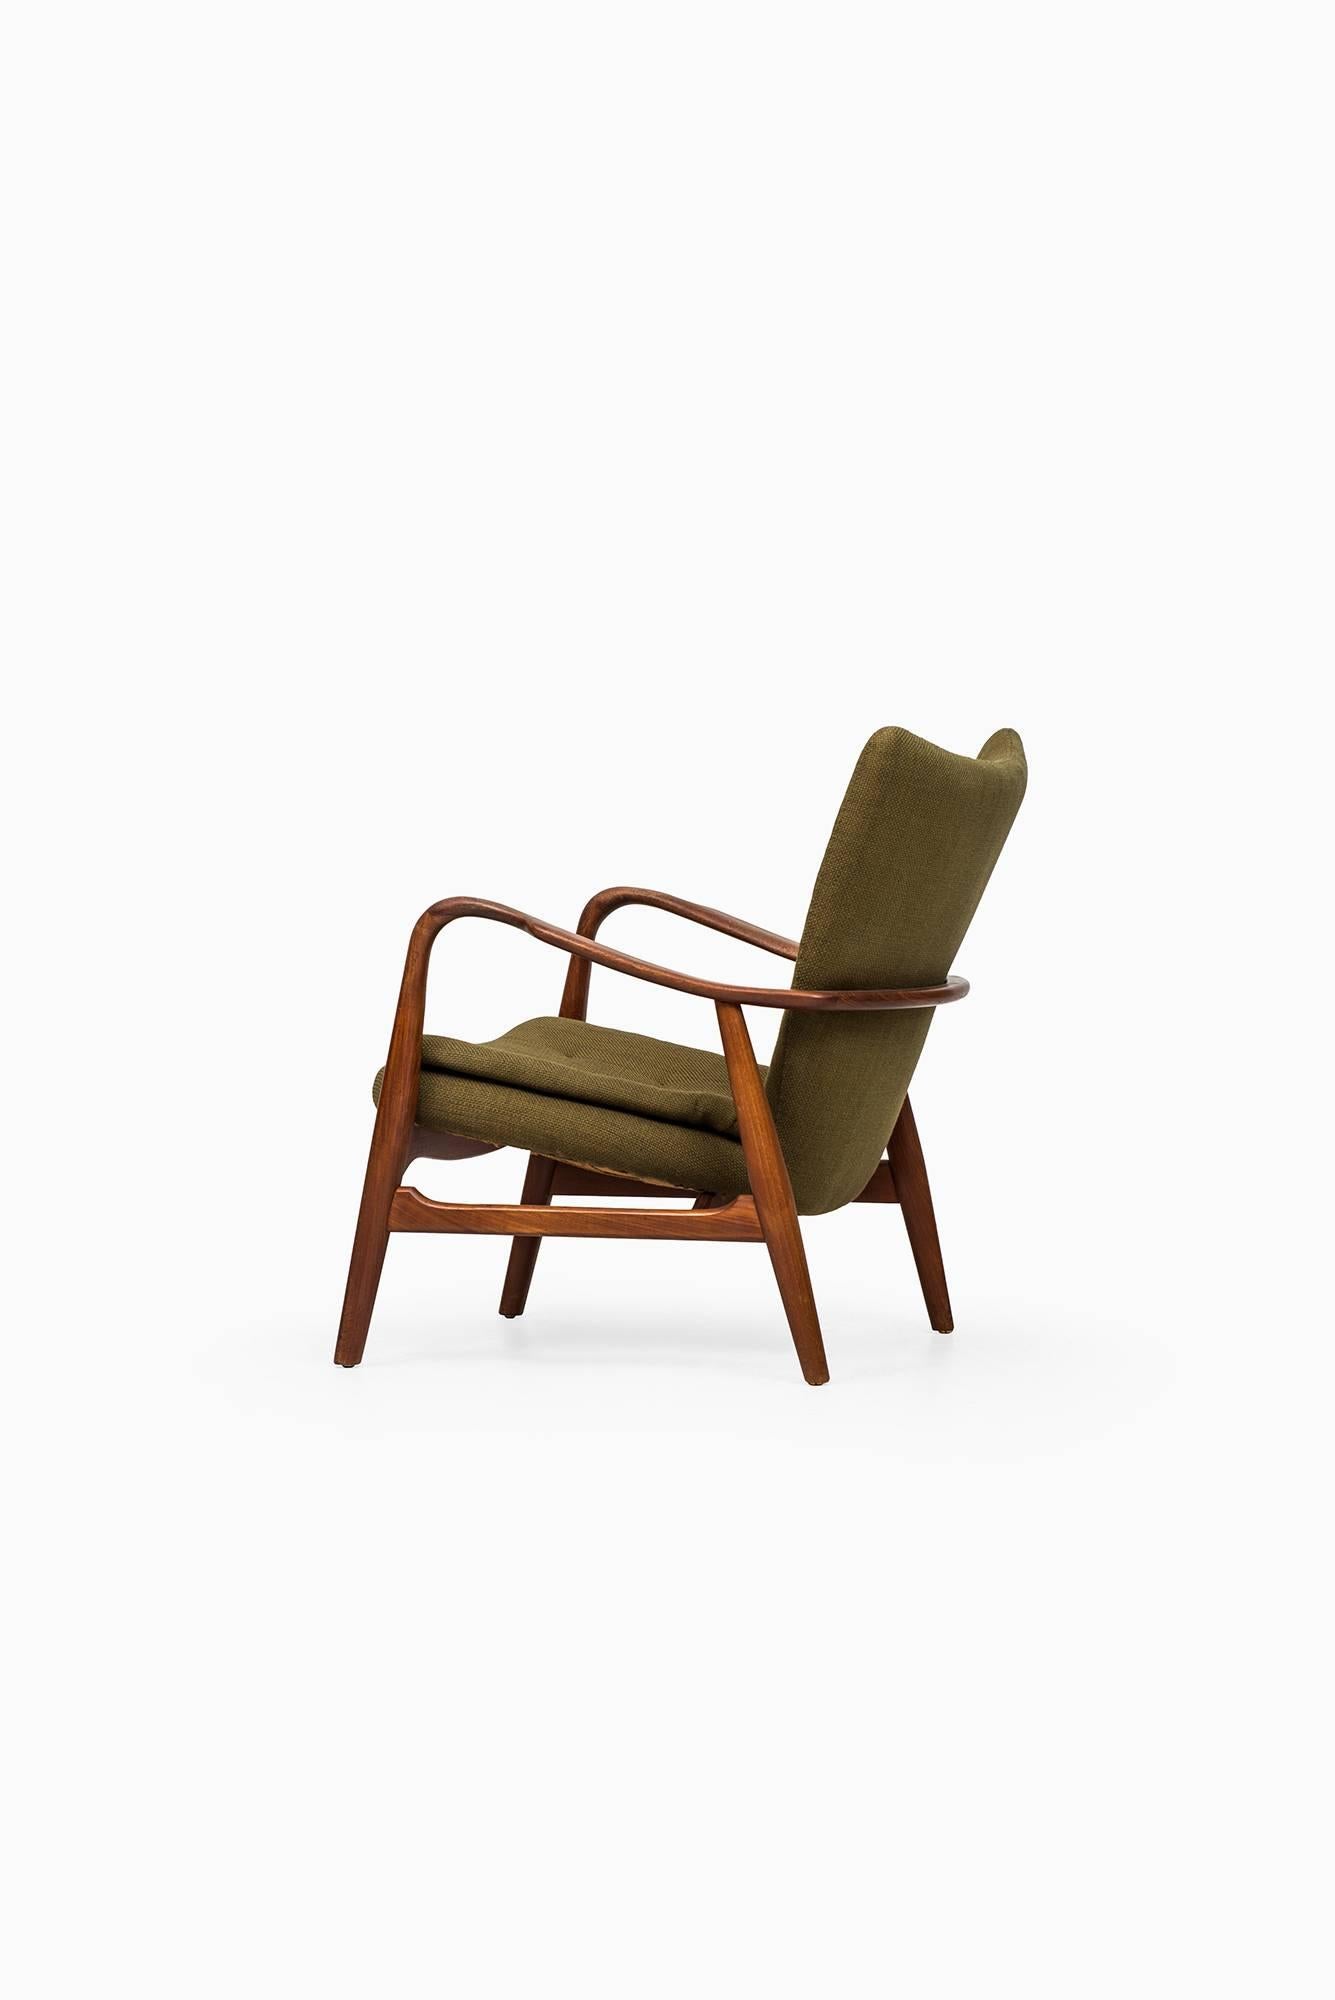 Danish Ib Madsen & Acton Schubell Easy Chair with Stool by Madsen & Schubell in Denmark